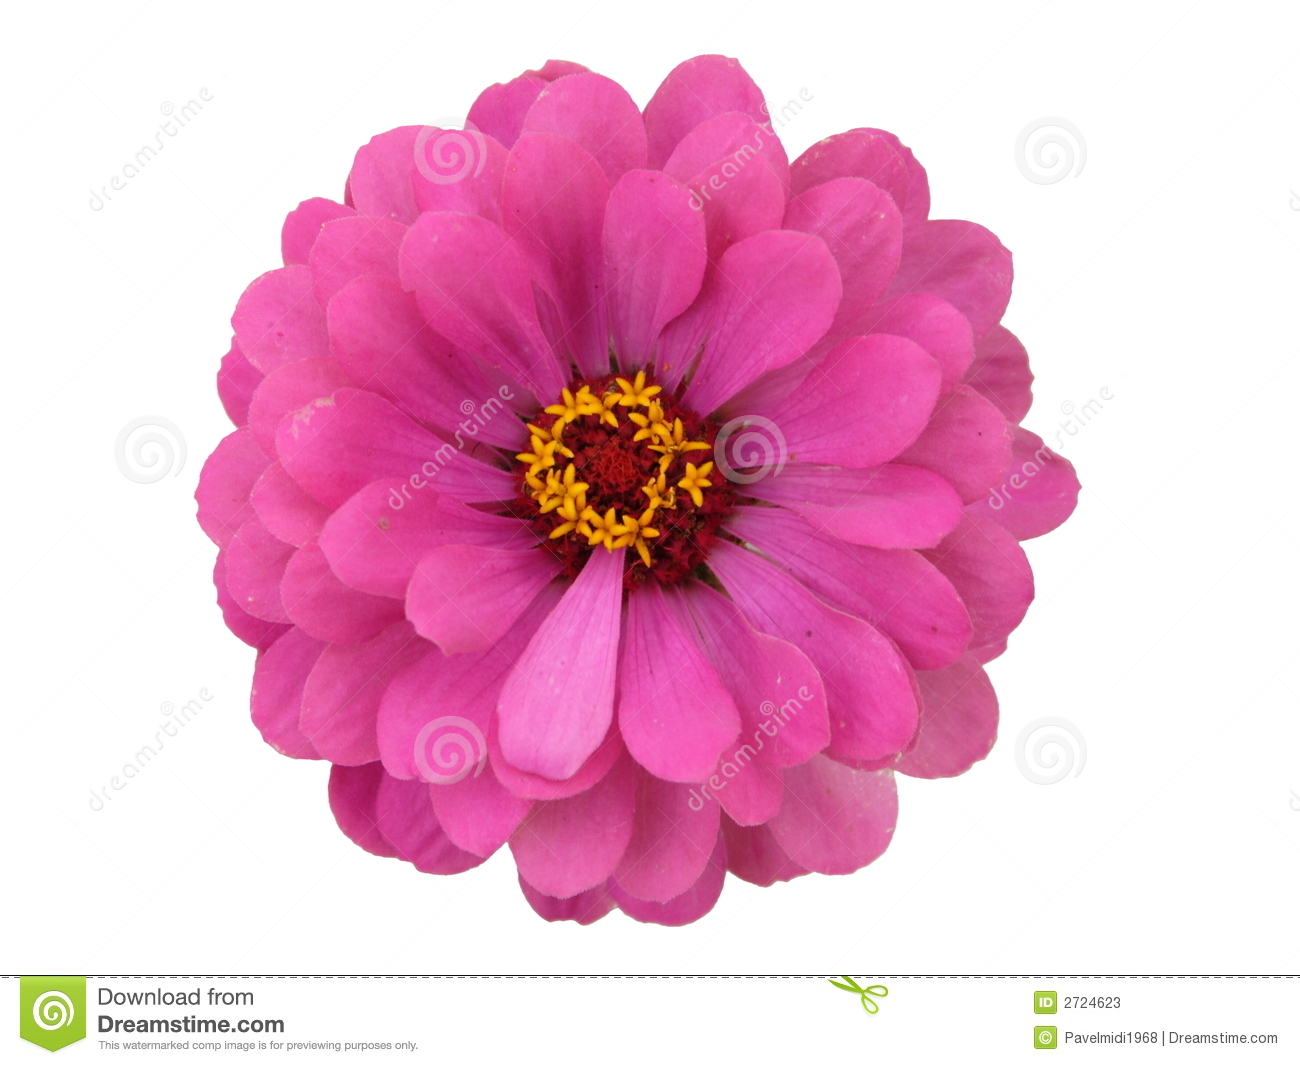 Zinnia clipart #10, Download drawings